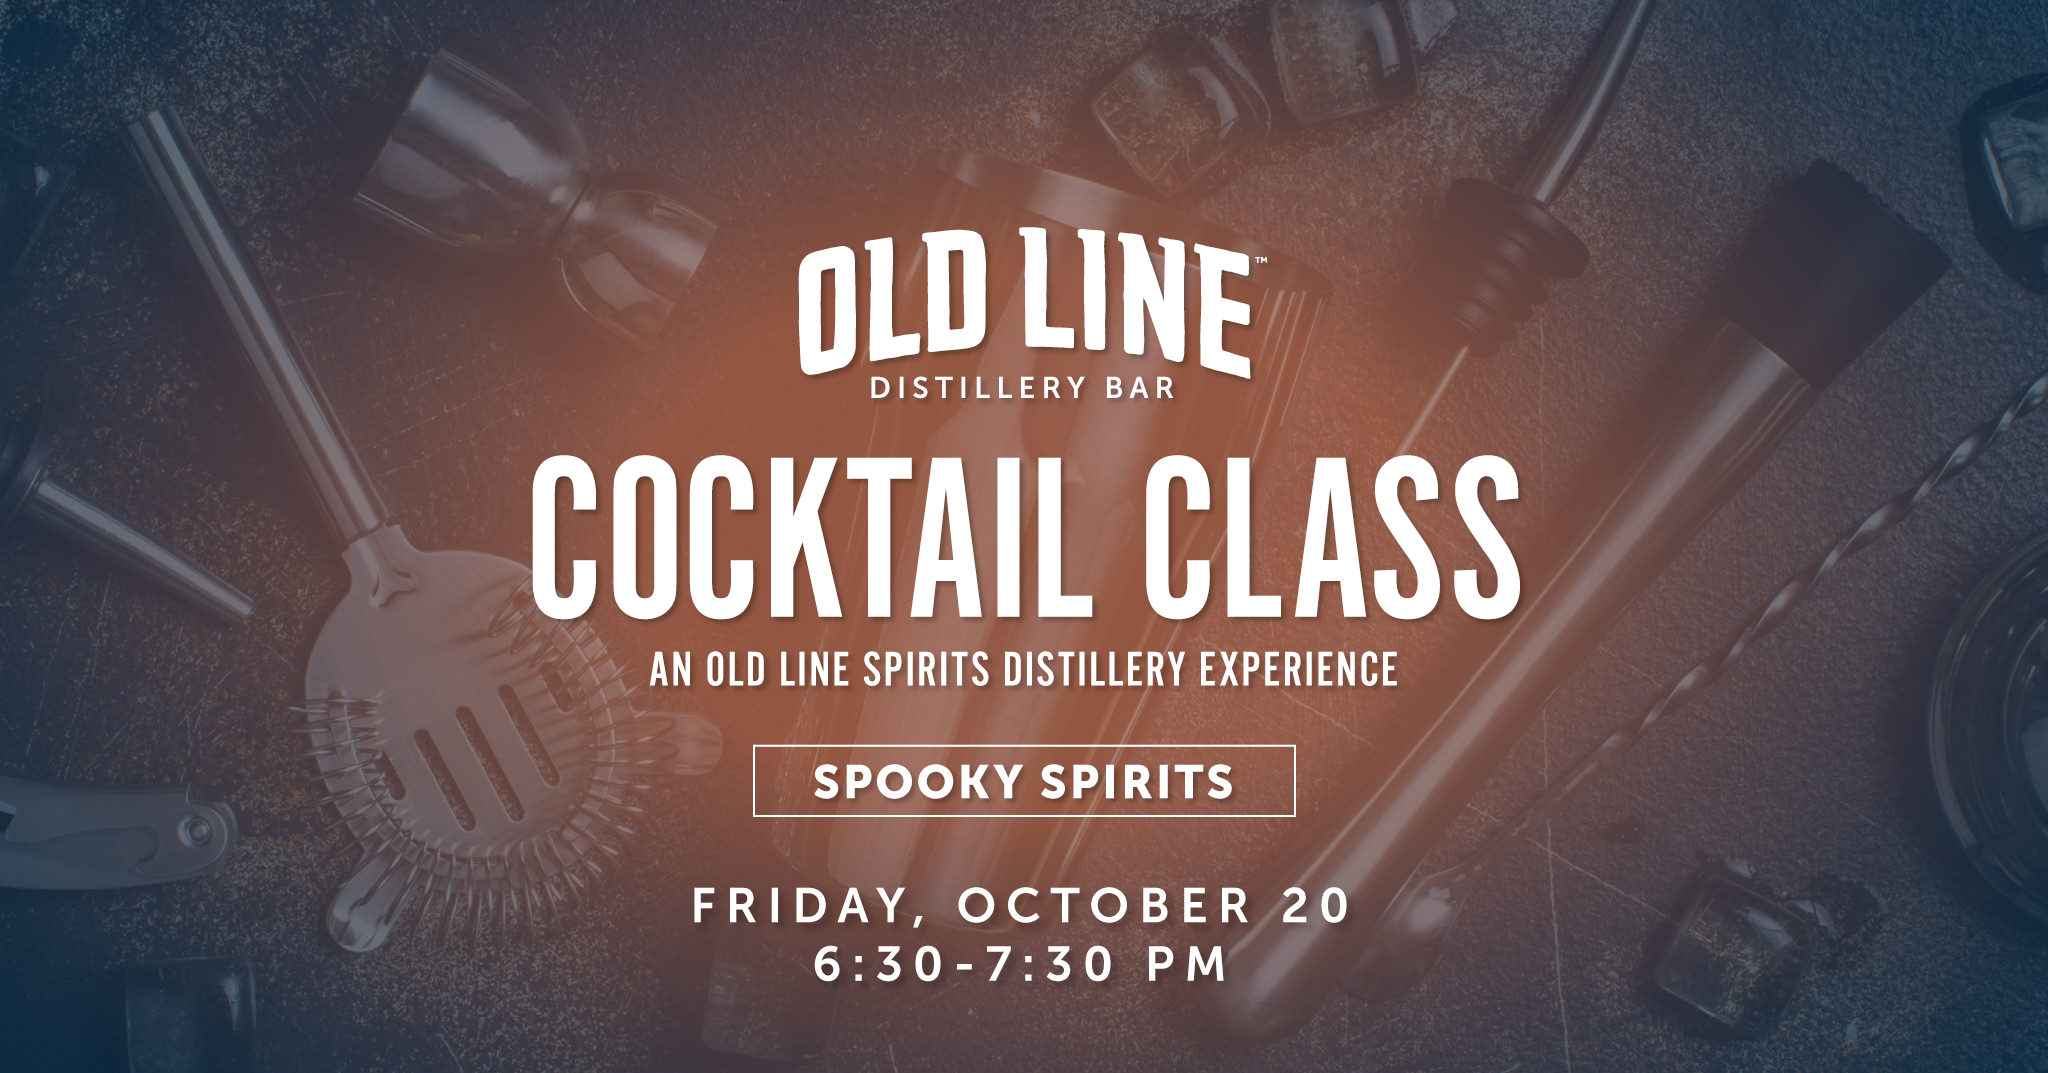 Old Line Cocktail Class Spooky Spirits